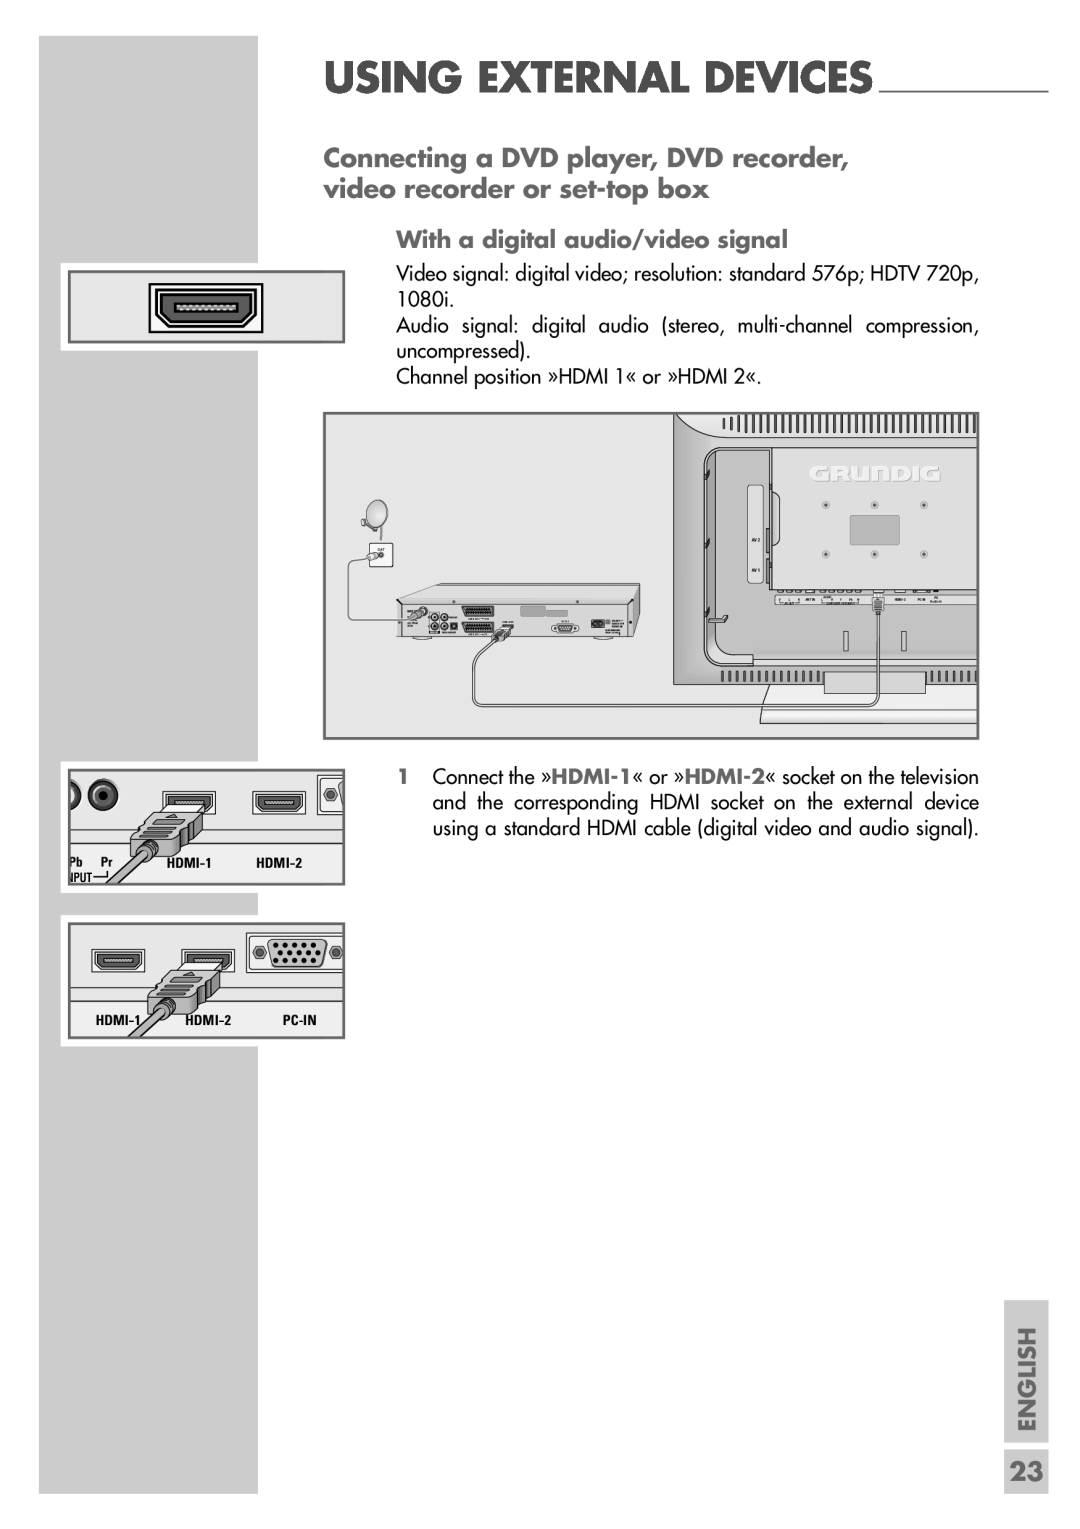 Grundig LXW 68-8720 Connecting a DVD player, DVD recorder, video recorder or set-top box, Using External Devices, English 